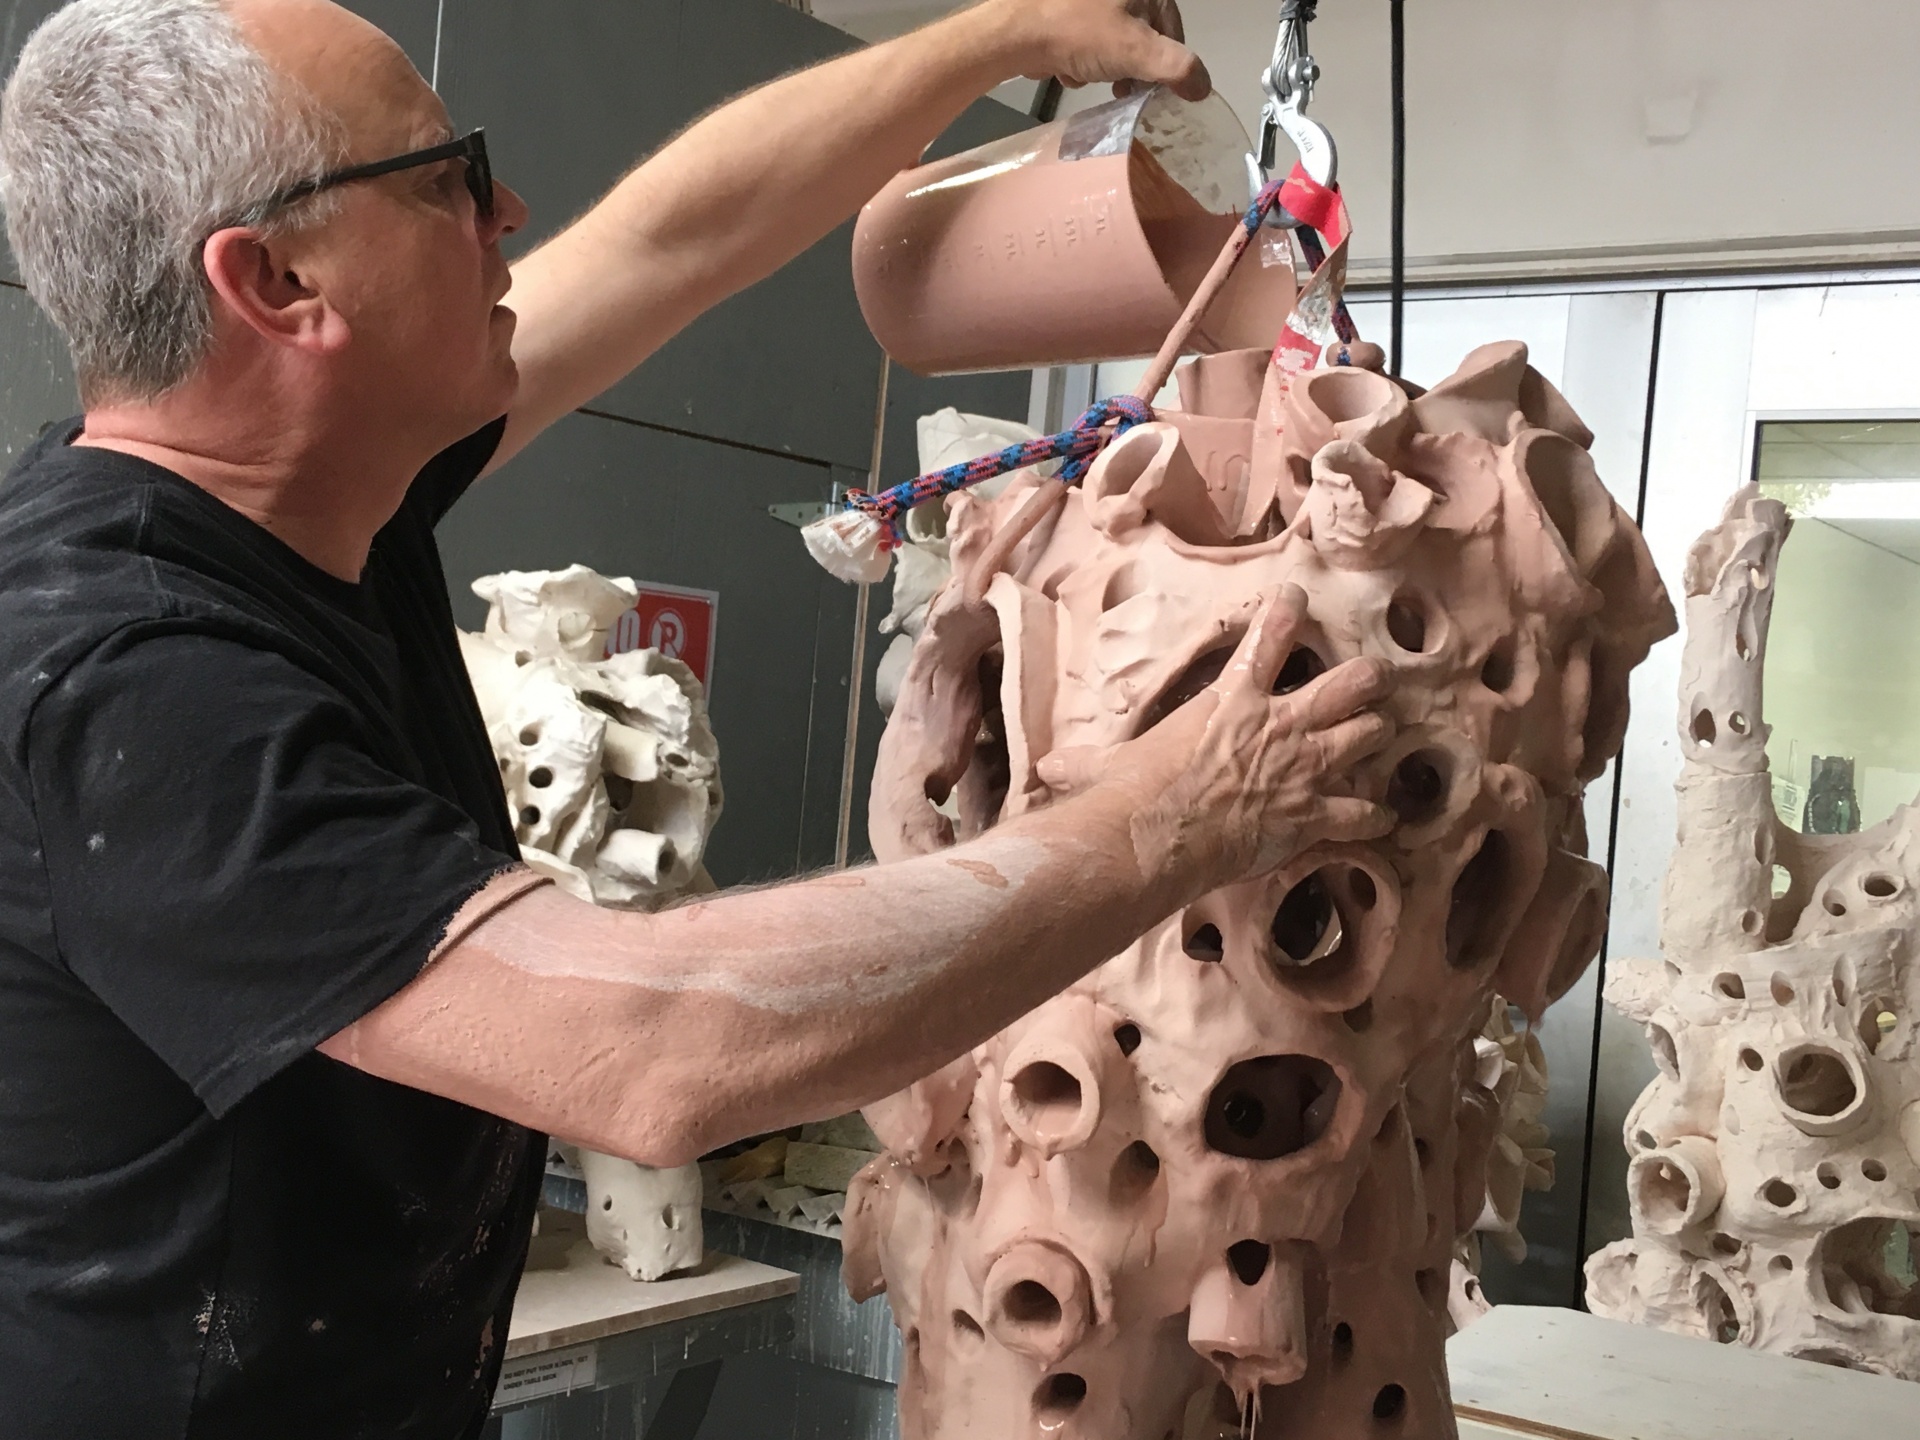 Creating the sculpture form